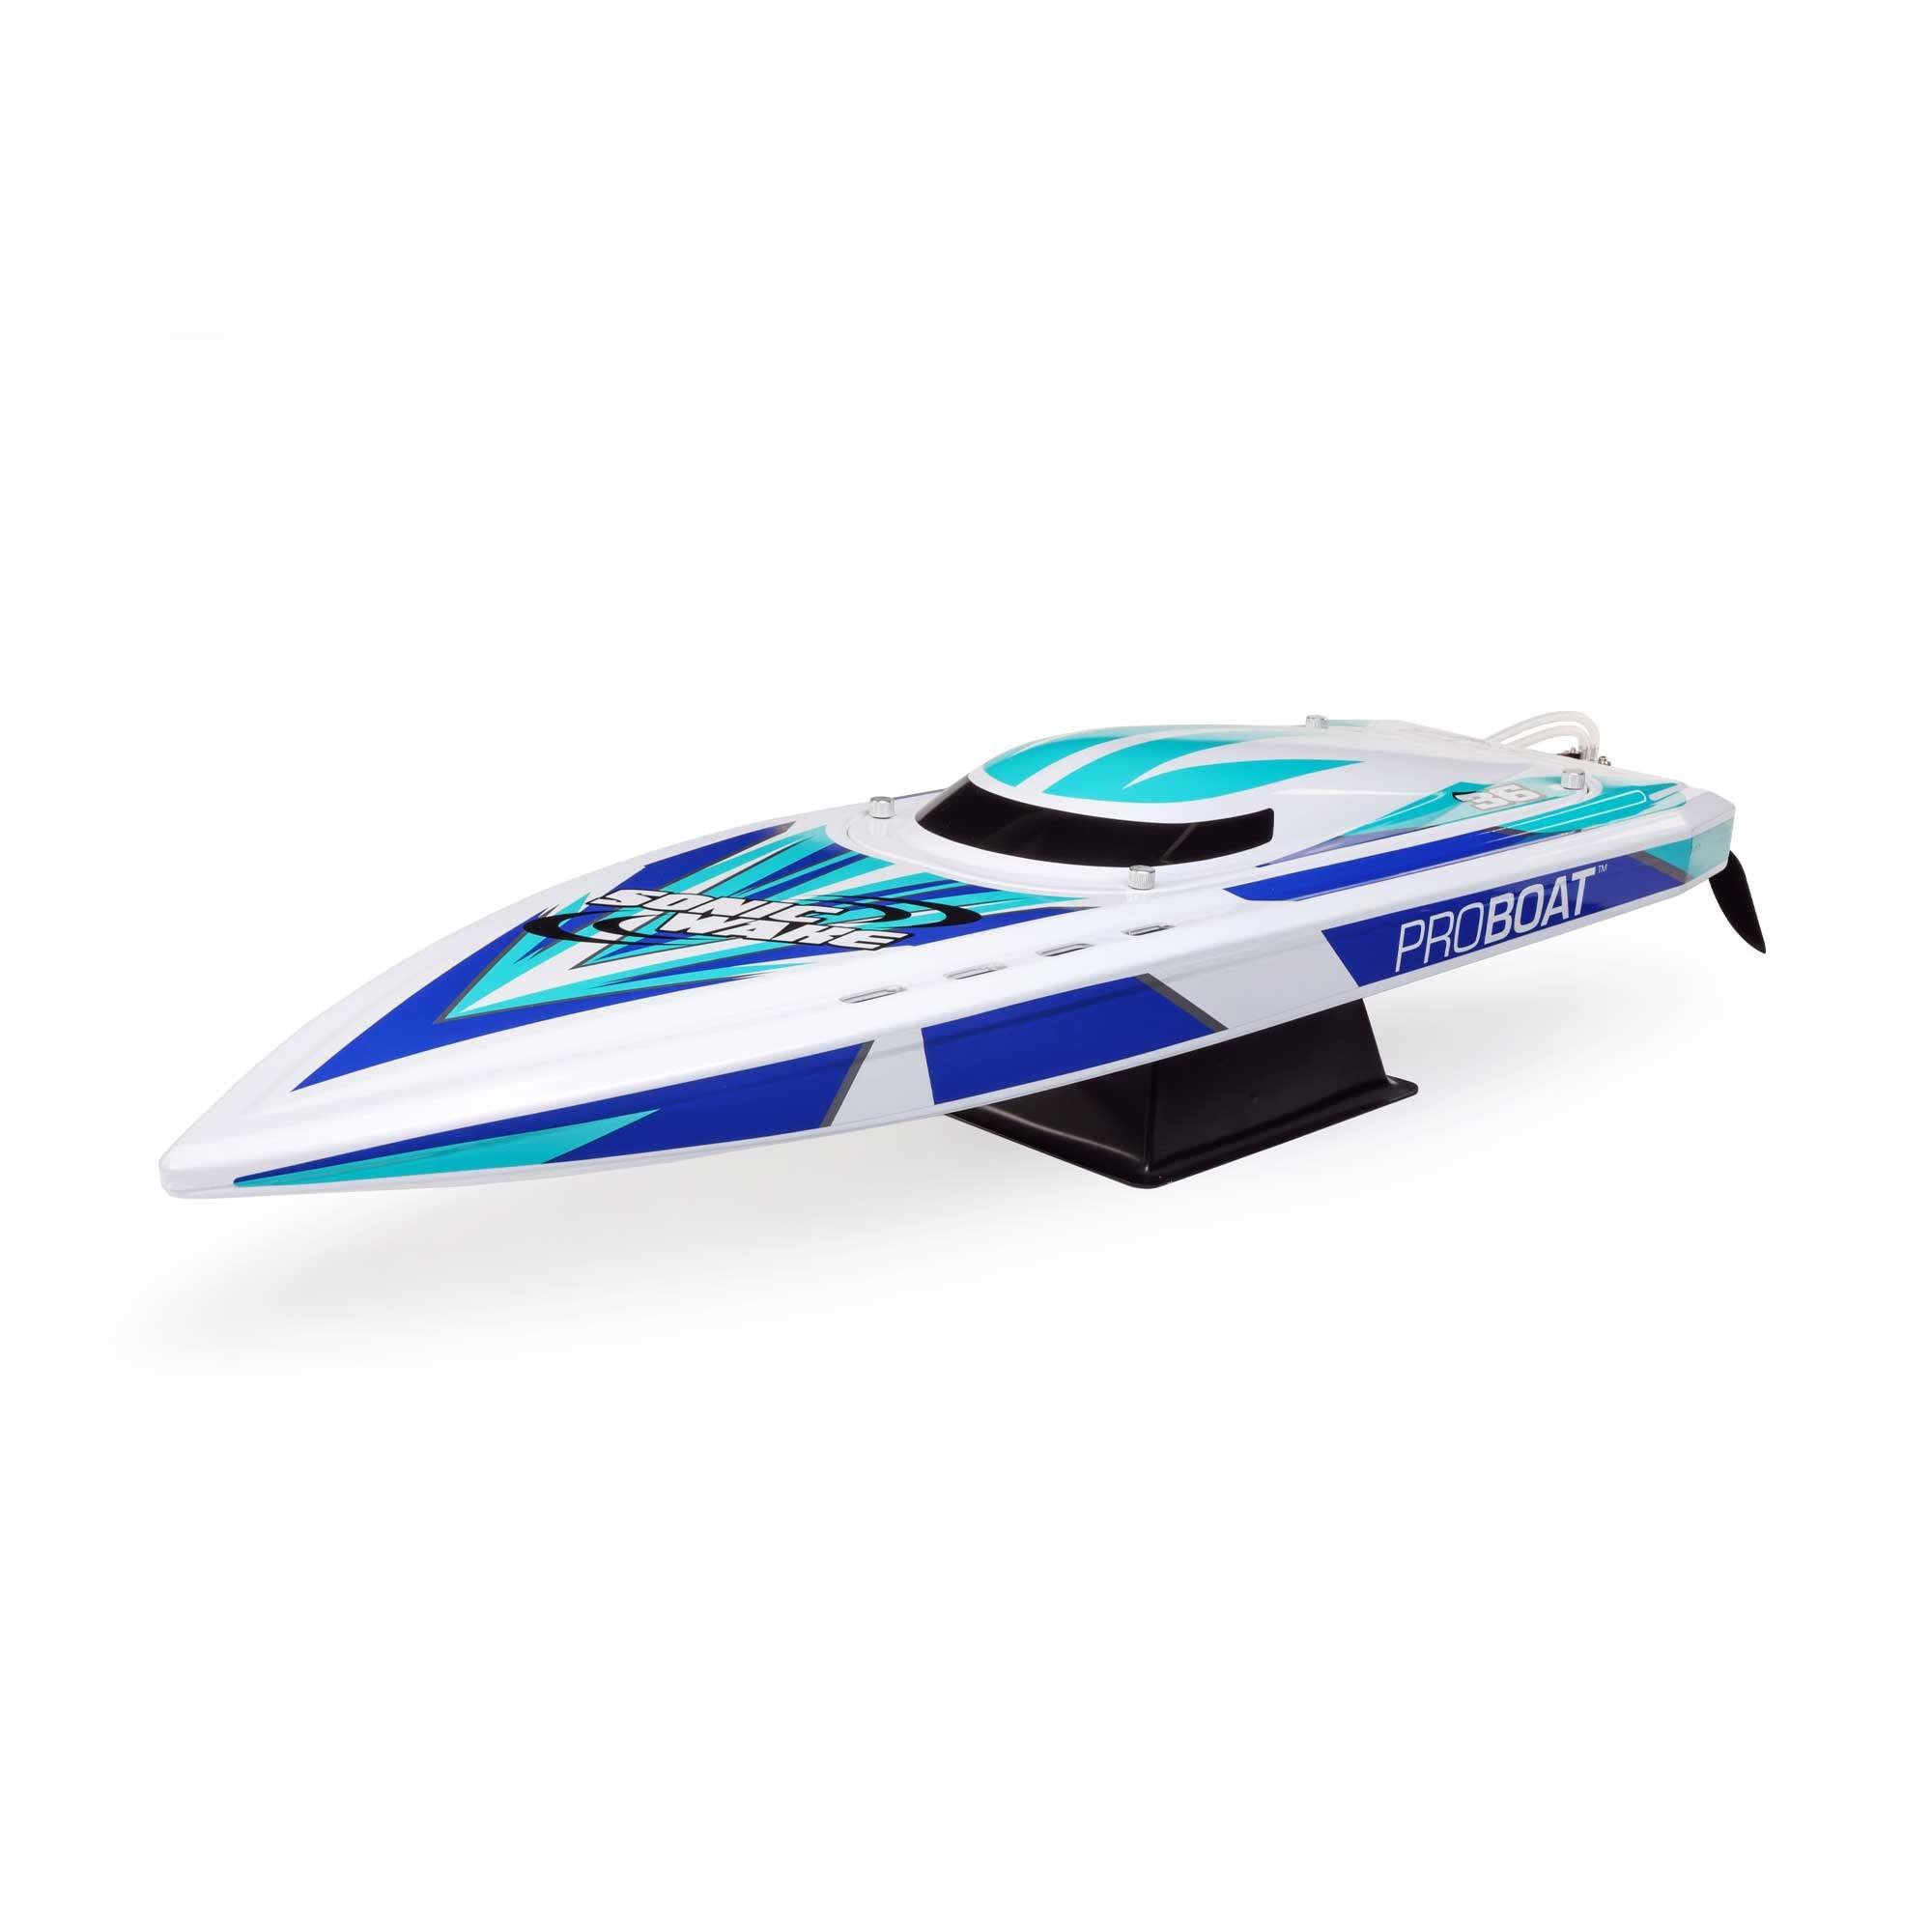 Proboat 36: Versatile and High-Performance RC Boat for Racing, Leisure, and Tricks: The ProBoat 36